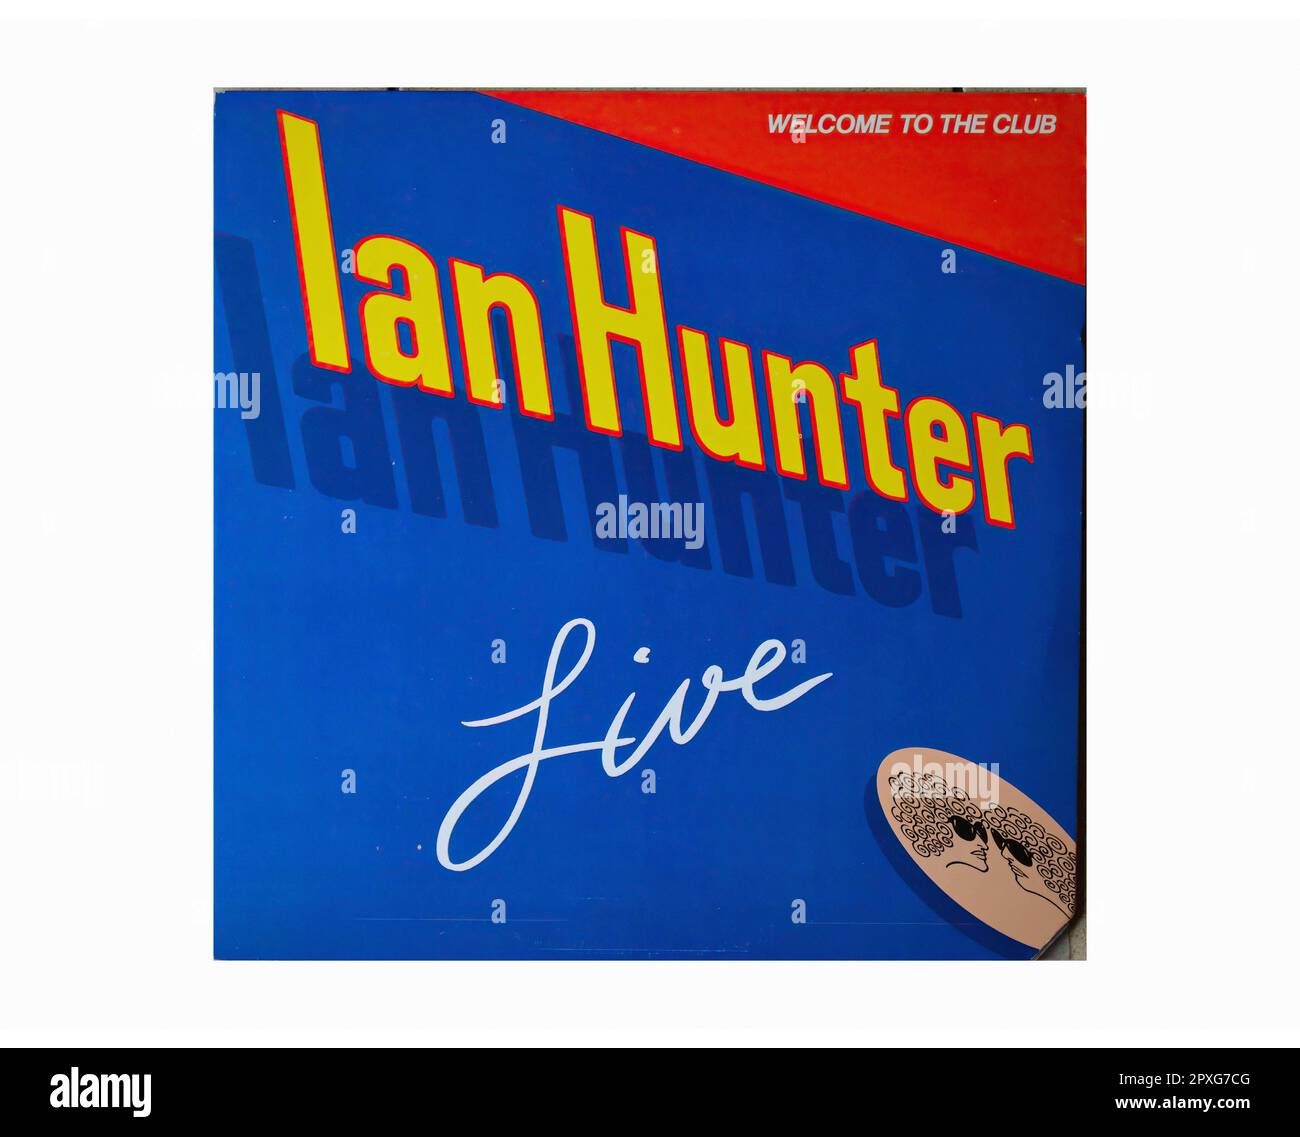 Ian Hunter - Live Welcome To The Club - Vintage L.P Music Vinyl Record Stock Photo